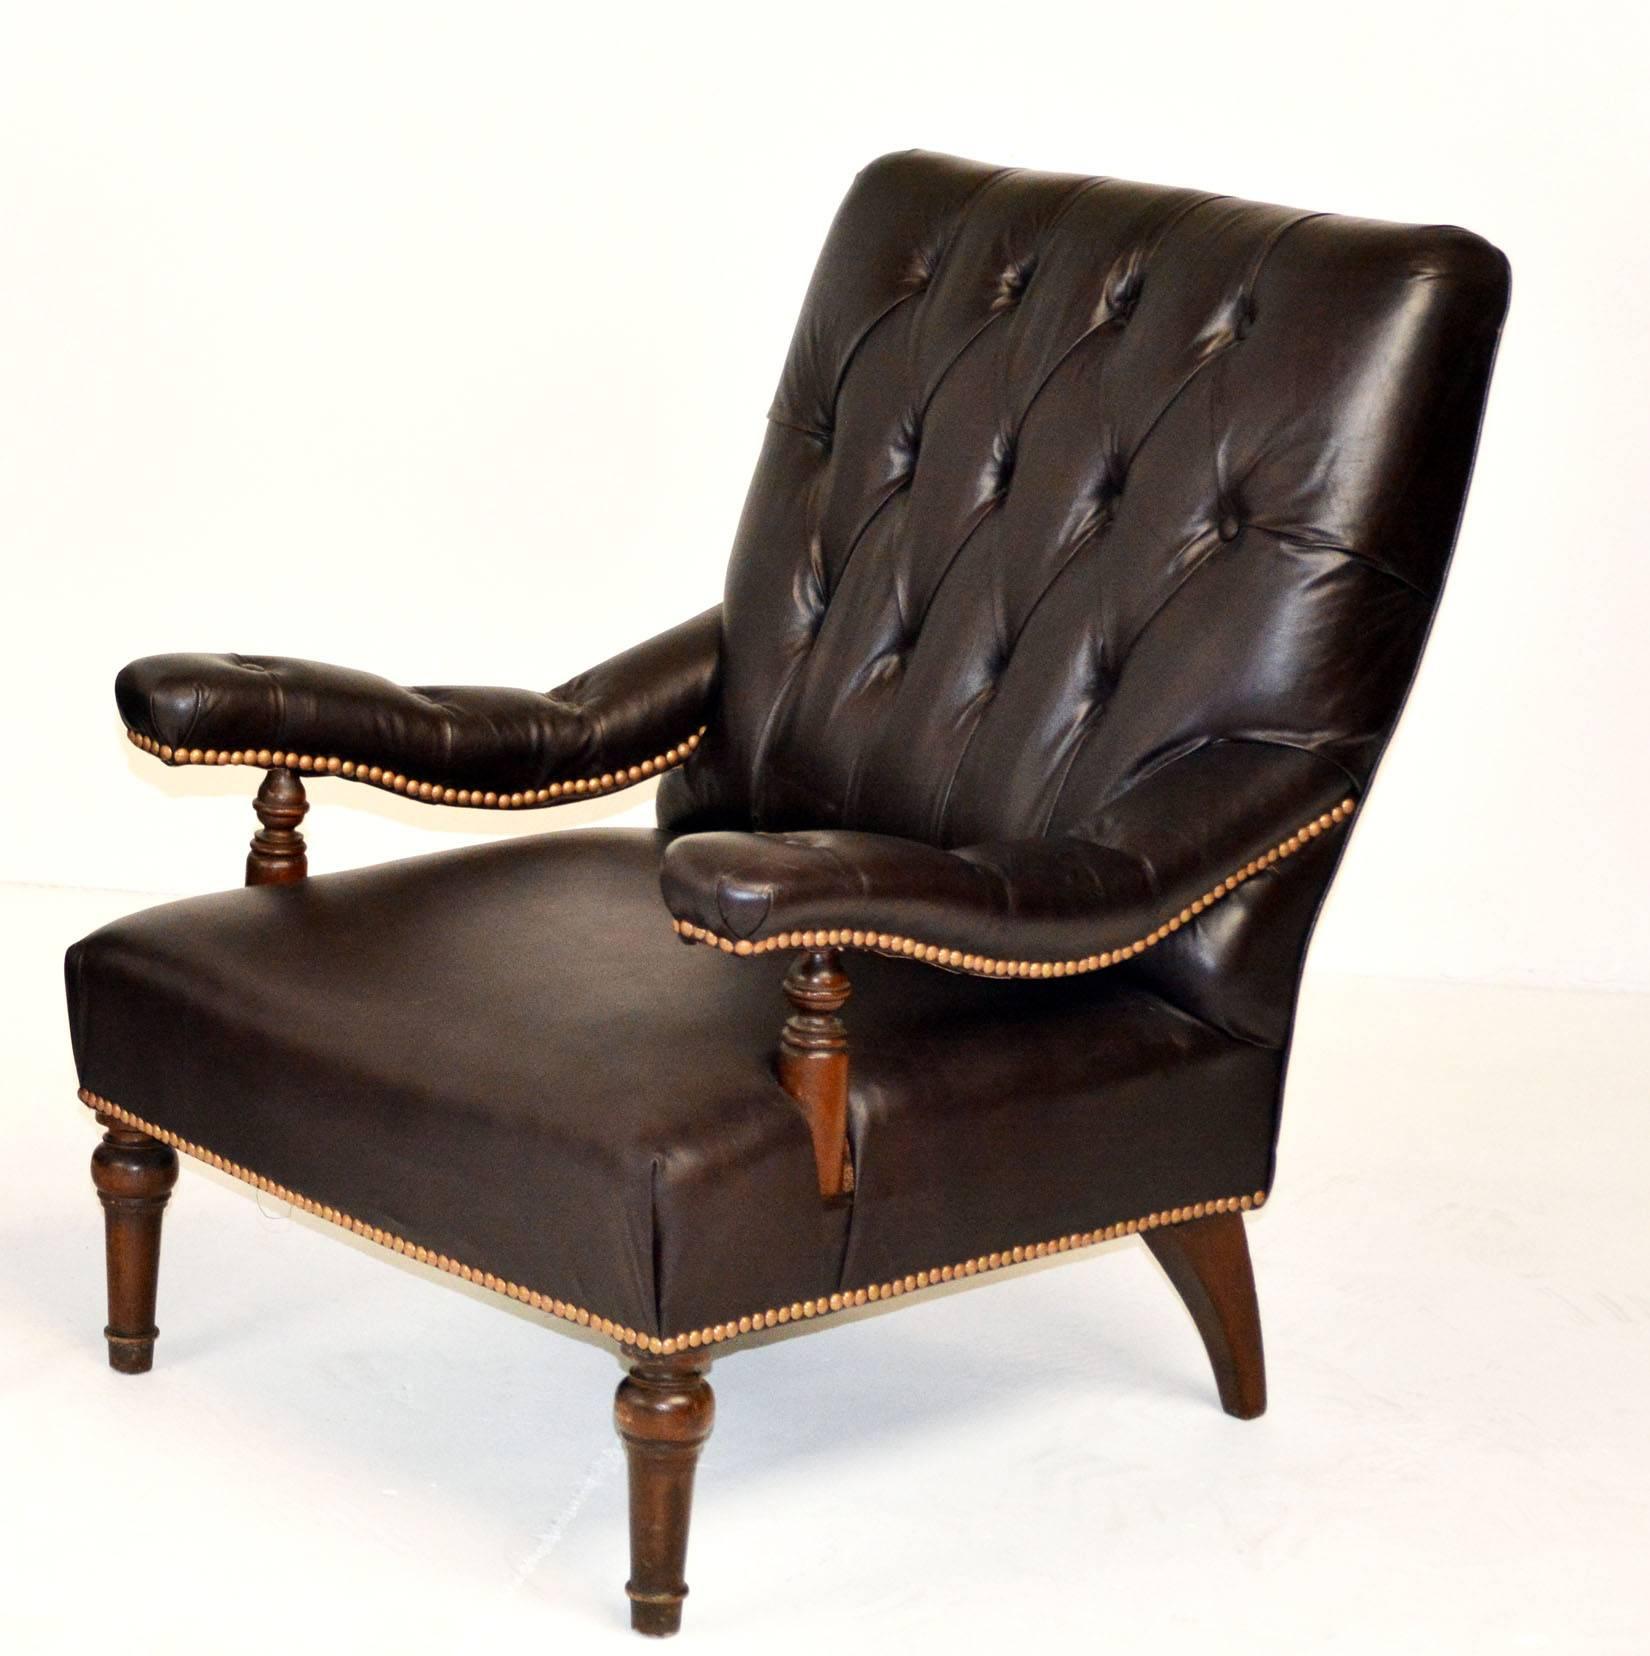 A pair of Edwardian leather upholstered armchairs with square back and open arms, all raised on all balustrade legs. Reupholstered within the past ten years in chocolate leather with shallow button tufting and brass nailheads. Referred to as lolling